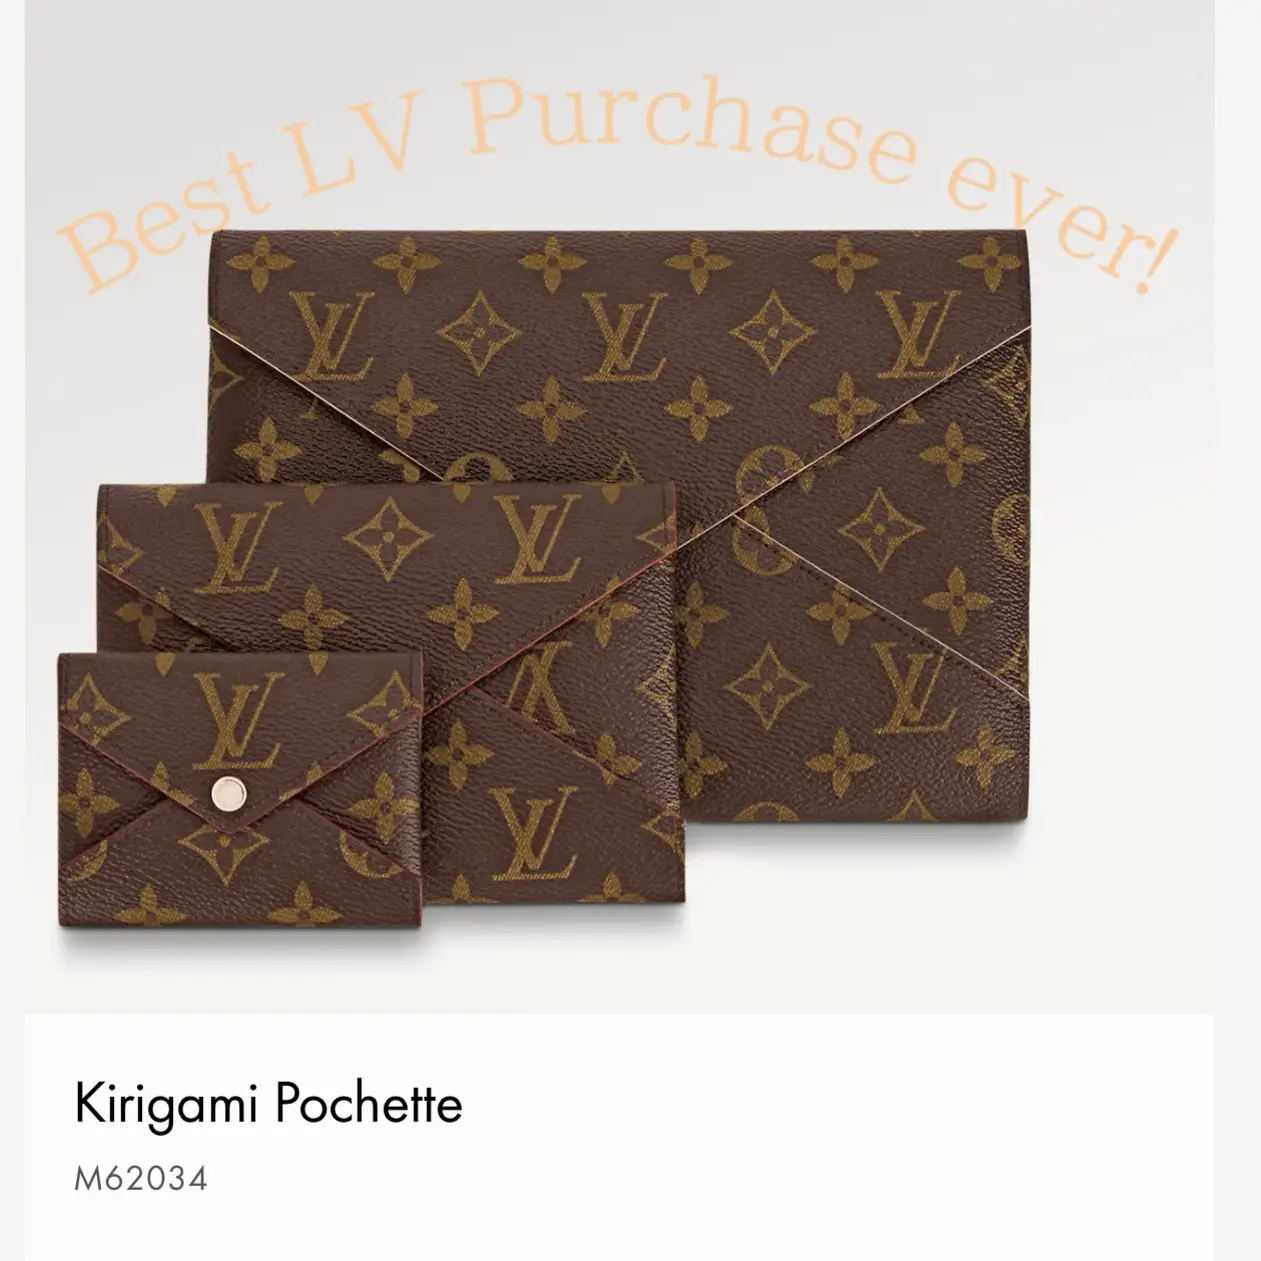 THIS IS MY FAVORITE  FIND! My Louis Vuitton Kirigami looks